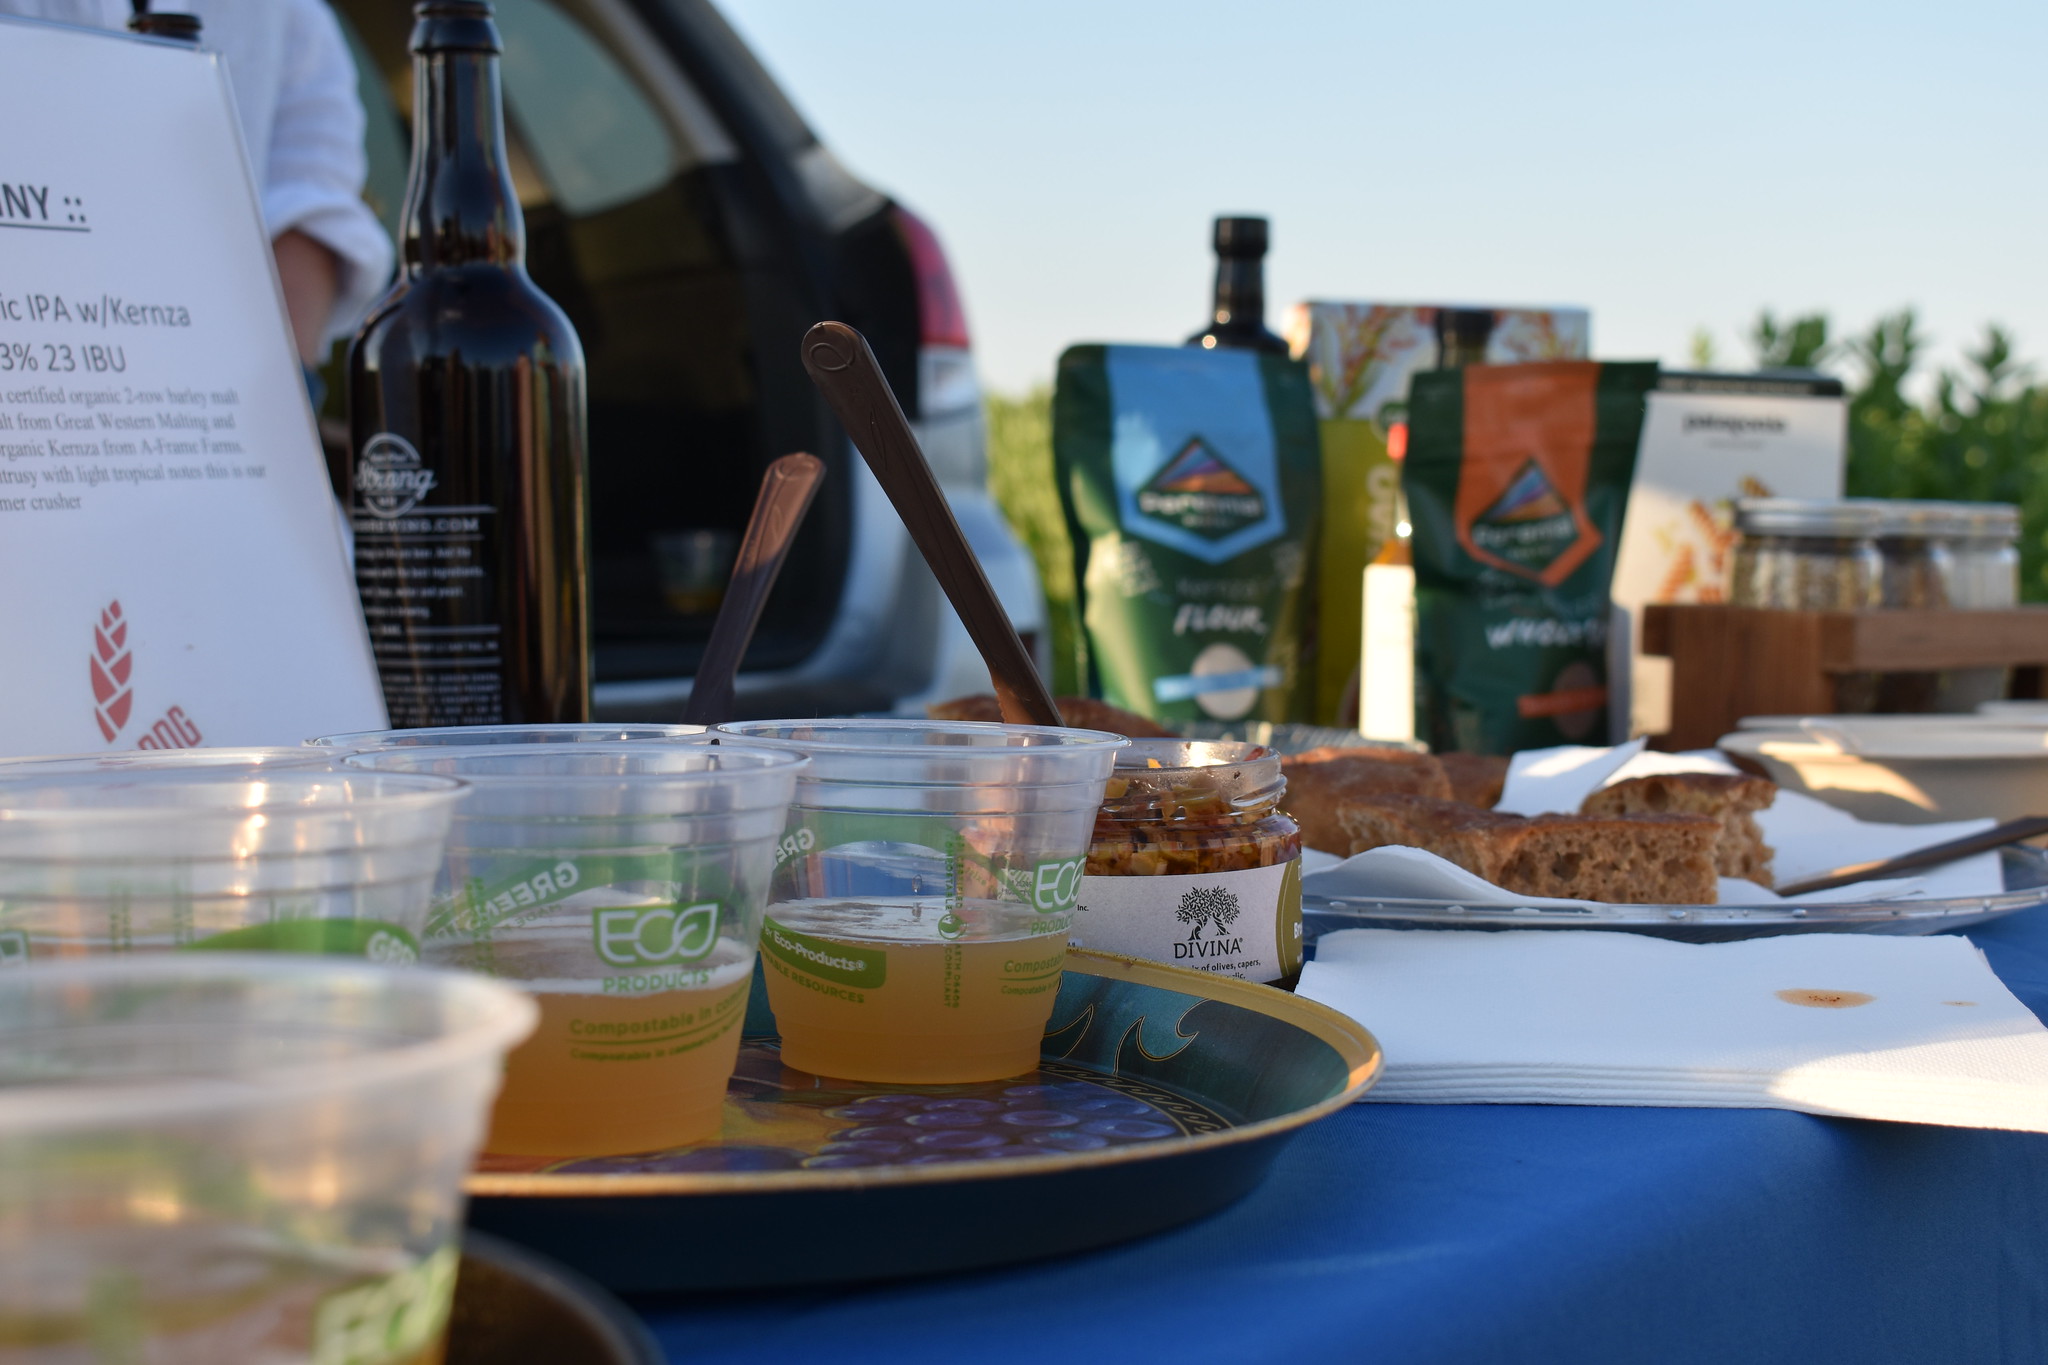 Products made using clean-water crops displayed on a table. Biodegradable cups are half-full with beer. A spoon sticks out of a small jar. Flour in its package is in the background.